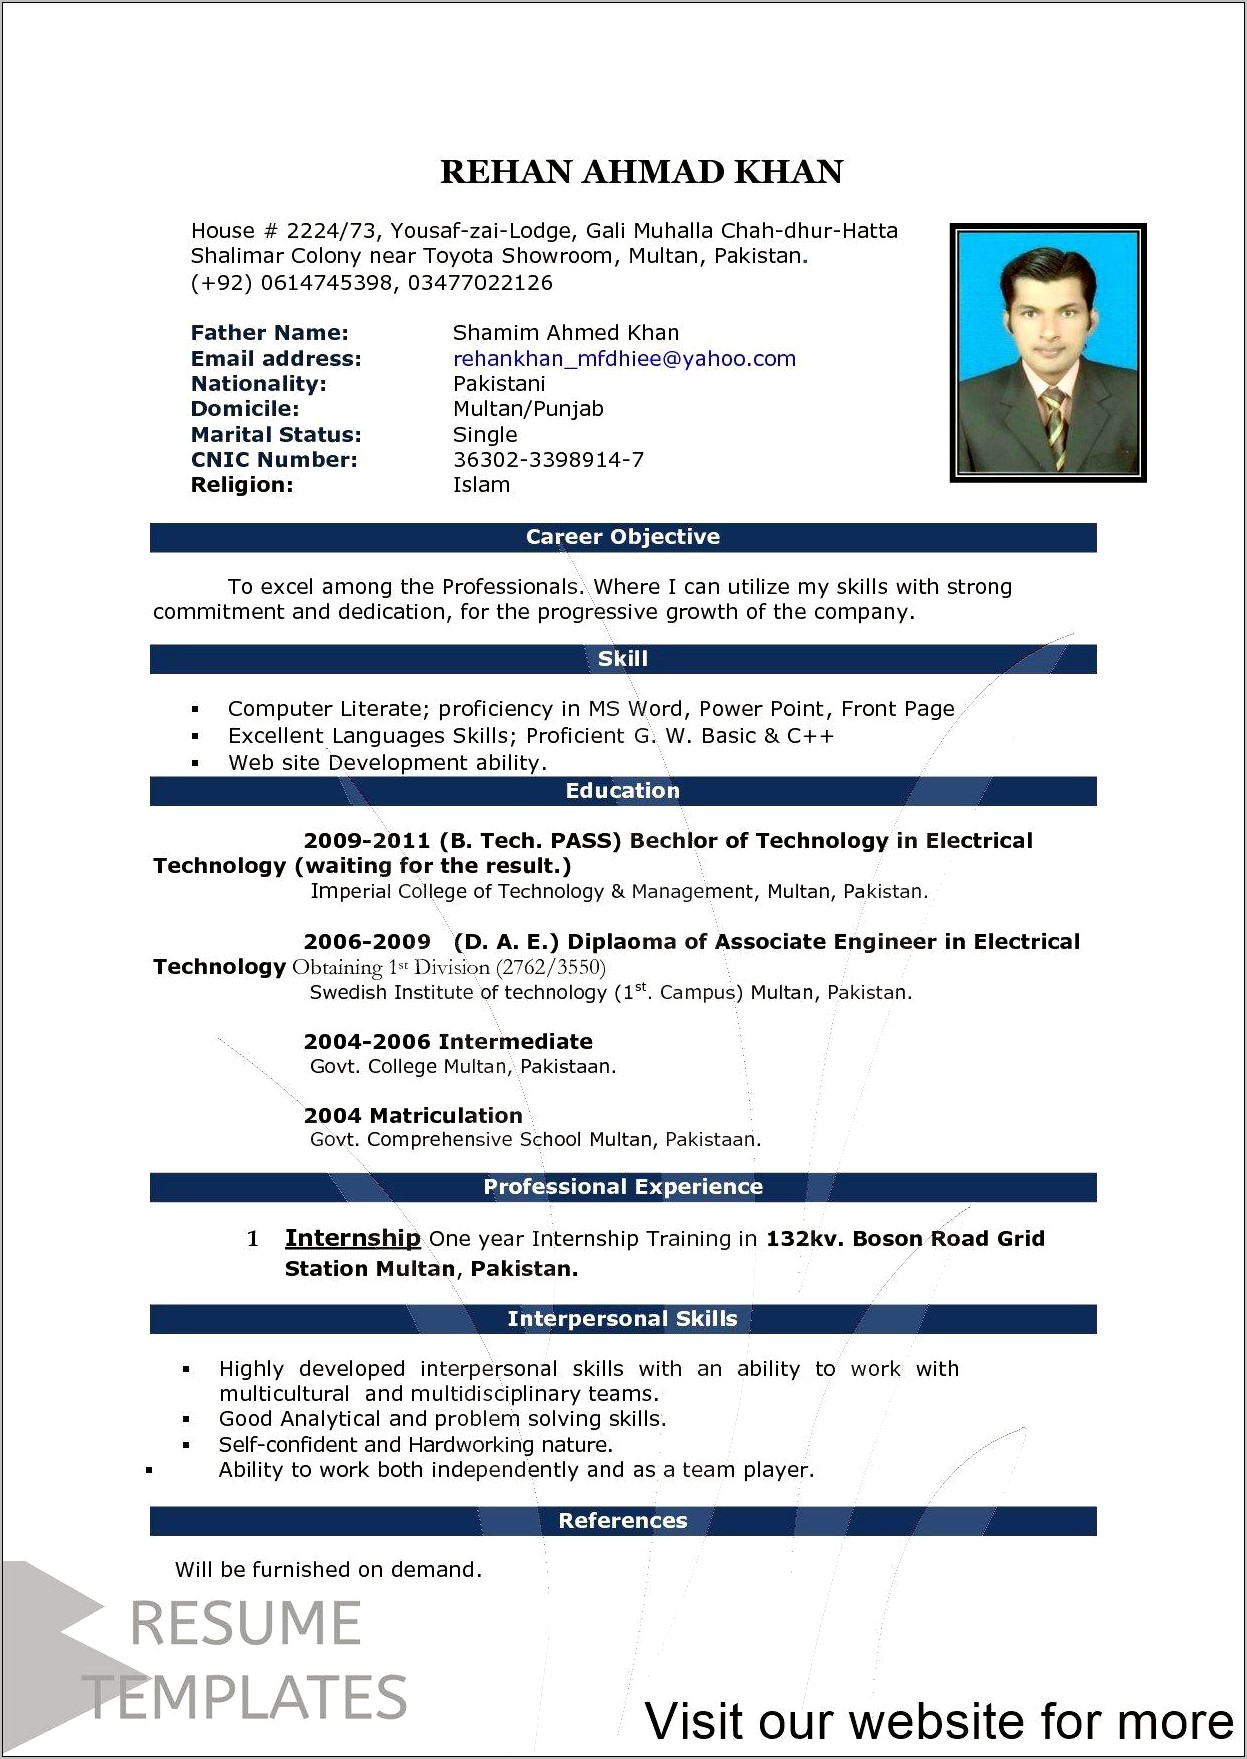 Resume Format For A Job Interview